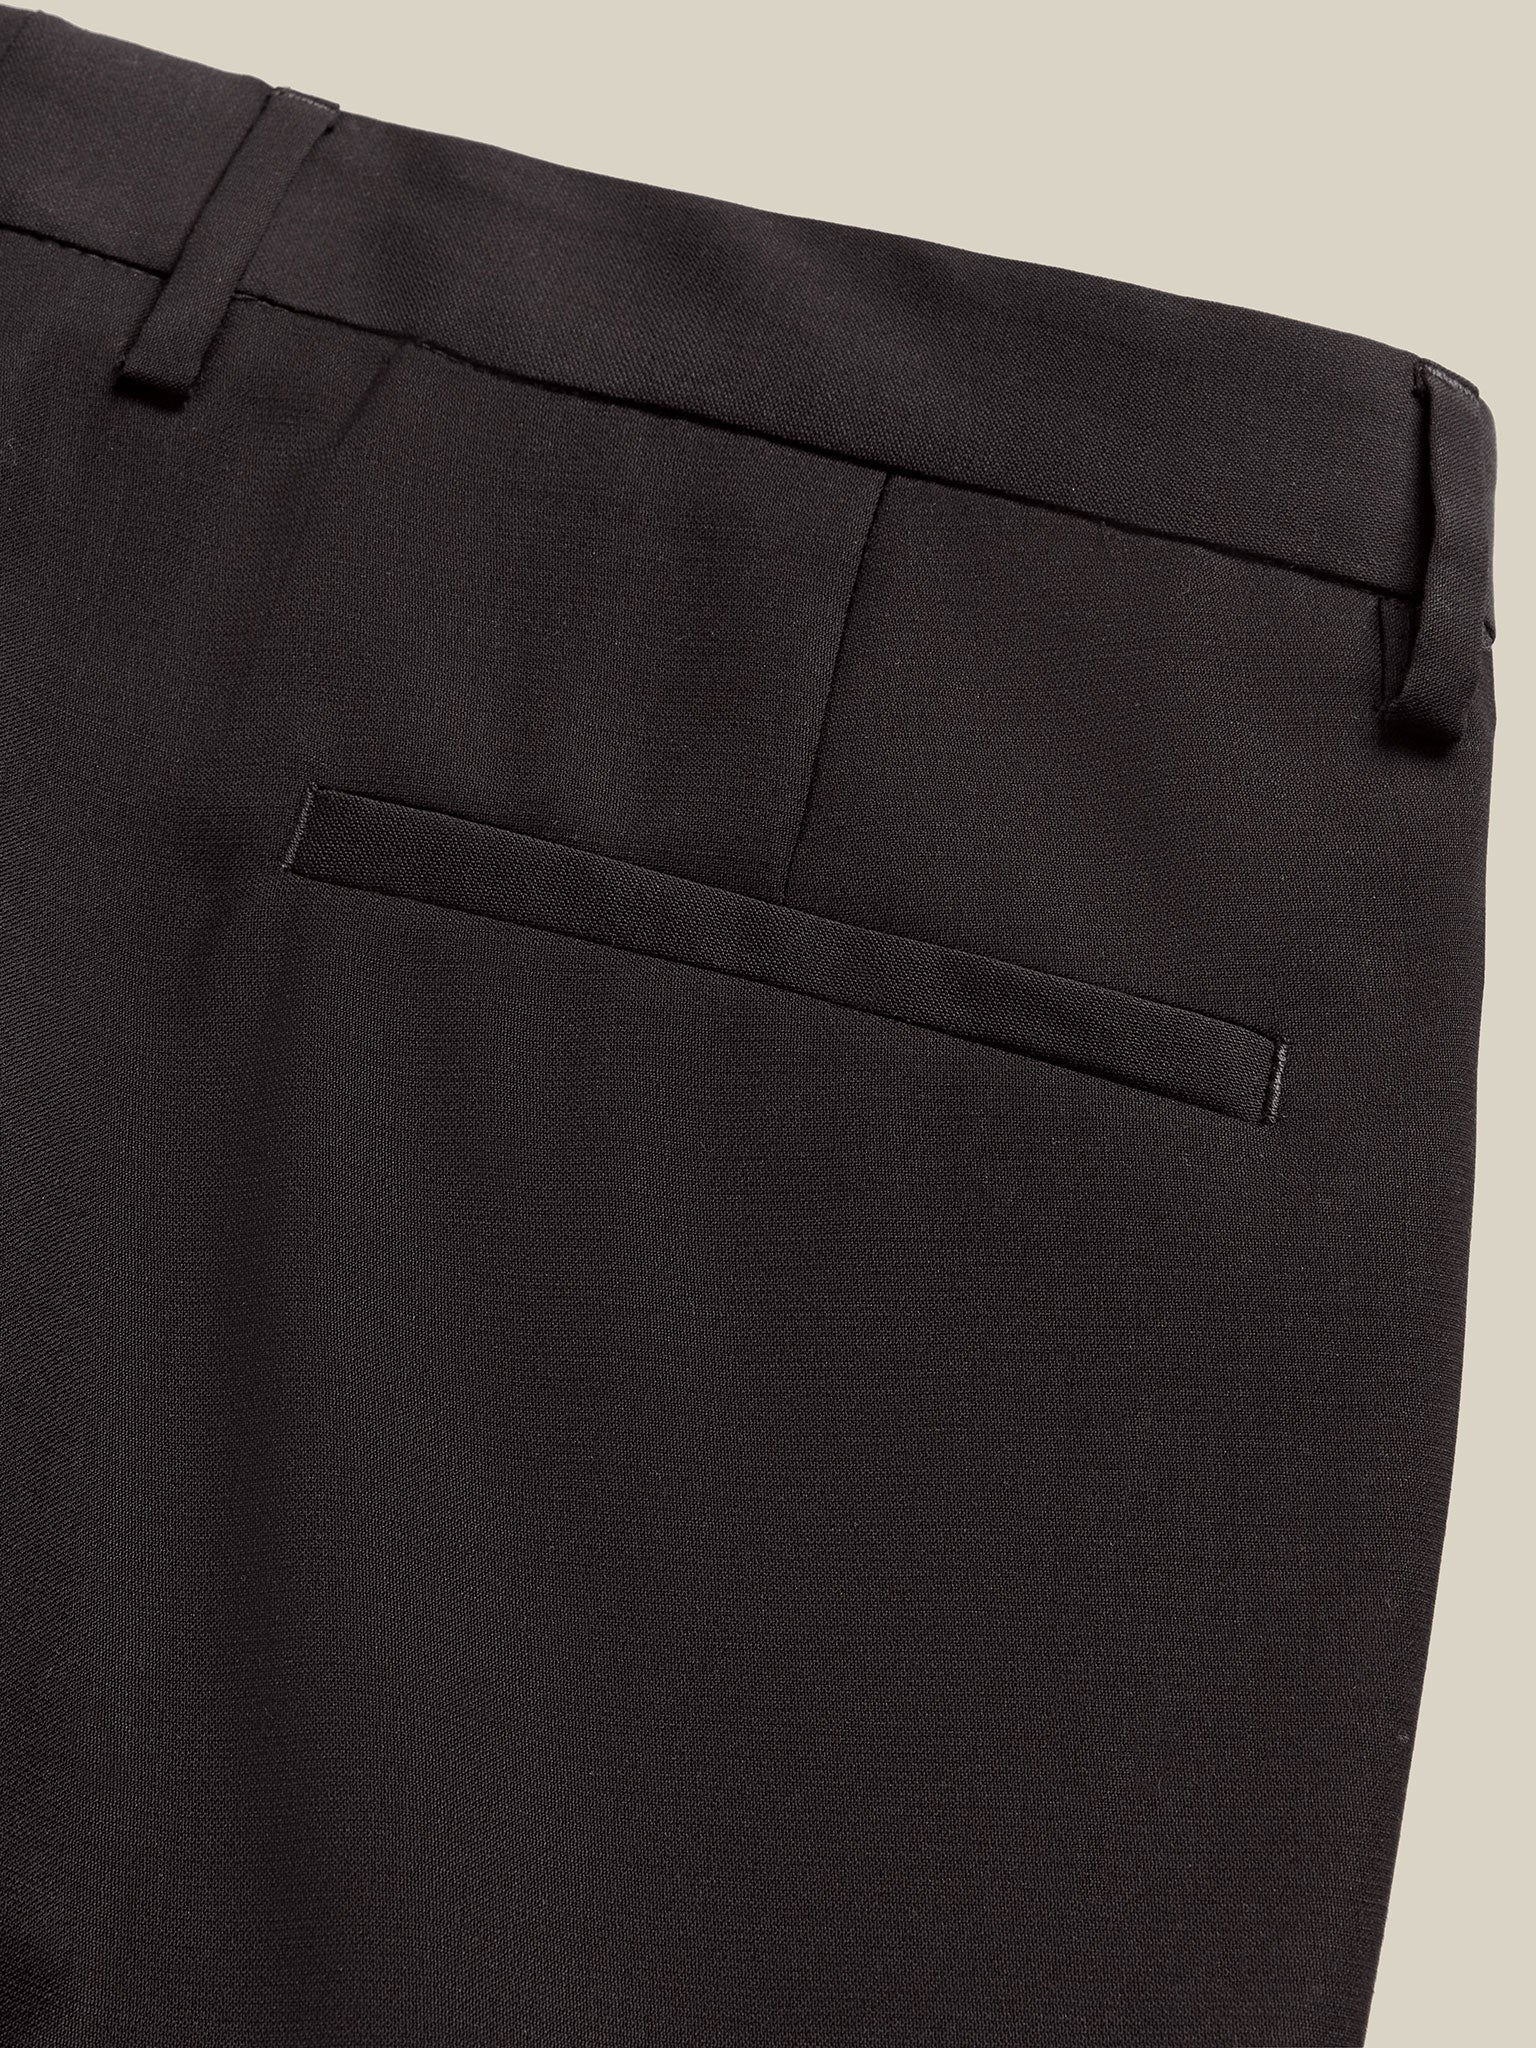 Comfortable men's grey wool trousers with stretch waistband and wrinkle-resistant fabric